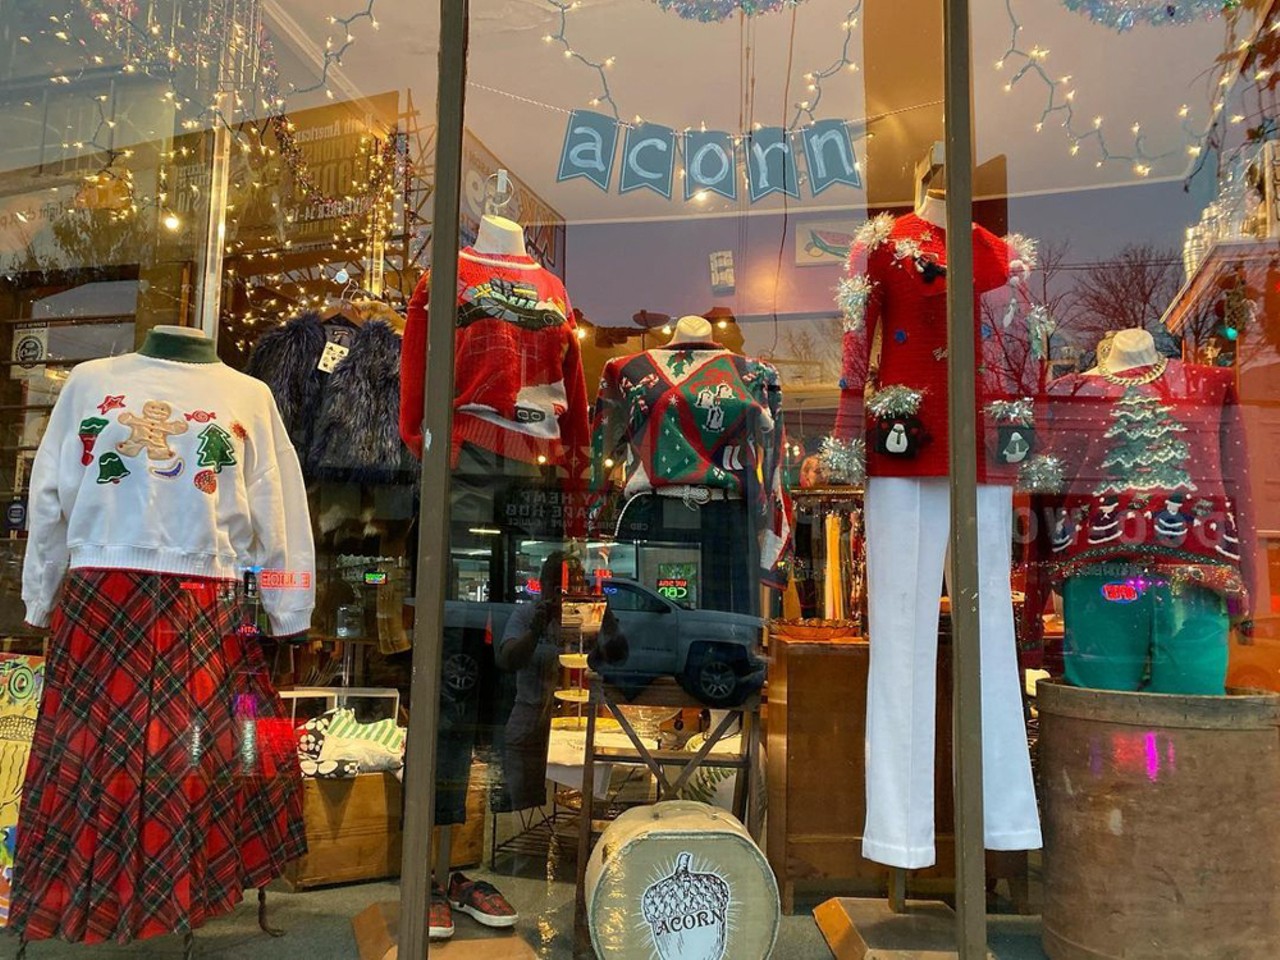  Acorn Apparel 
1602 Bardstown Road
Clothes are the star at this Bardstown Road store. Acorn says that they&#146;ve got the goods from the Victorian Era through the 80s.
Photo via acornapparel/Instagram